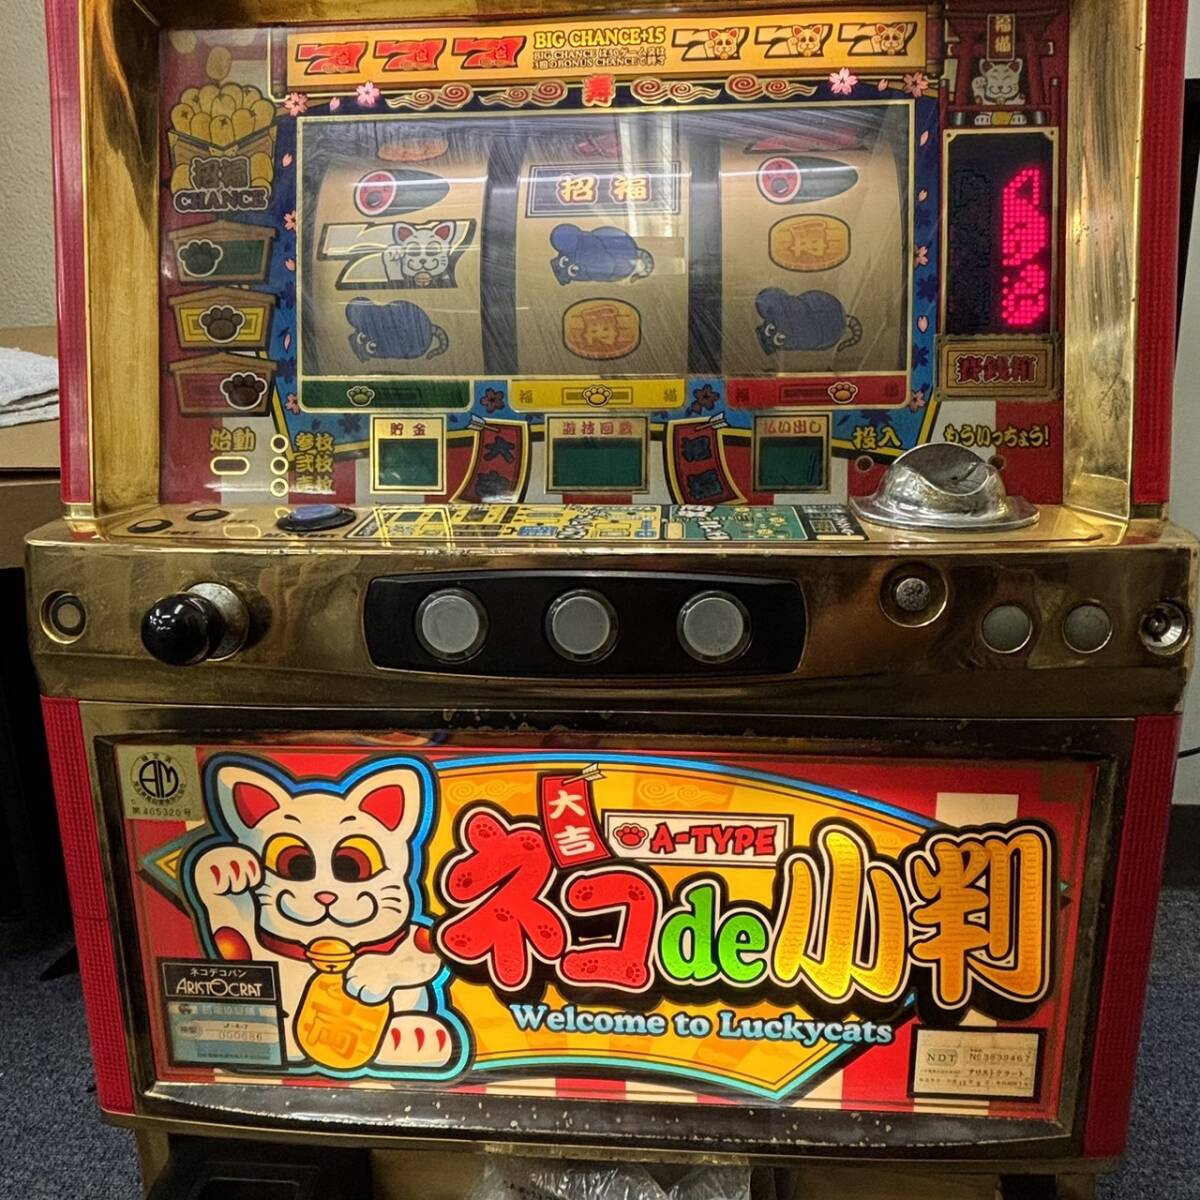 [ operation goods ] direct pickup limitation Chiba city 4 serial number cat de small stamp Aristo cooler toA TYPE Sanyo thing production pachinko slot machine apparatus translation have secondhand goods 